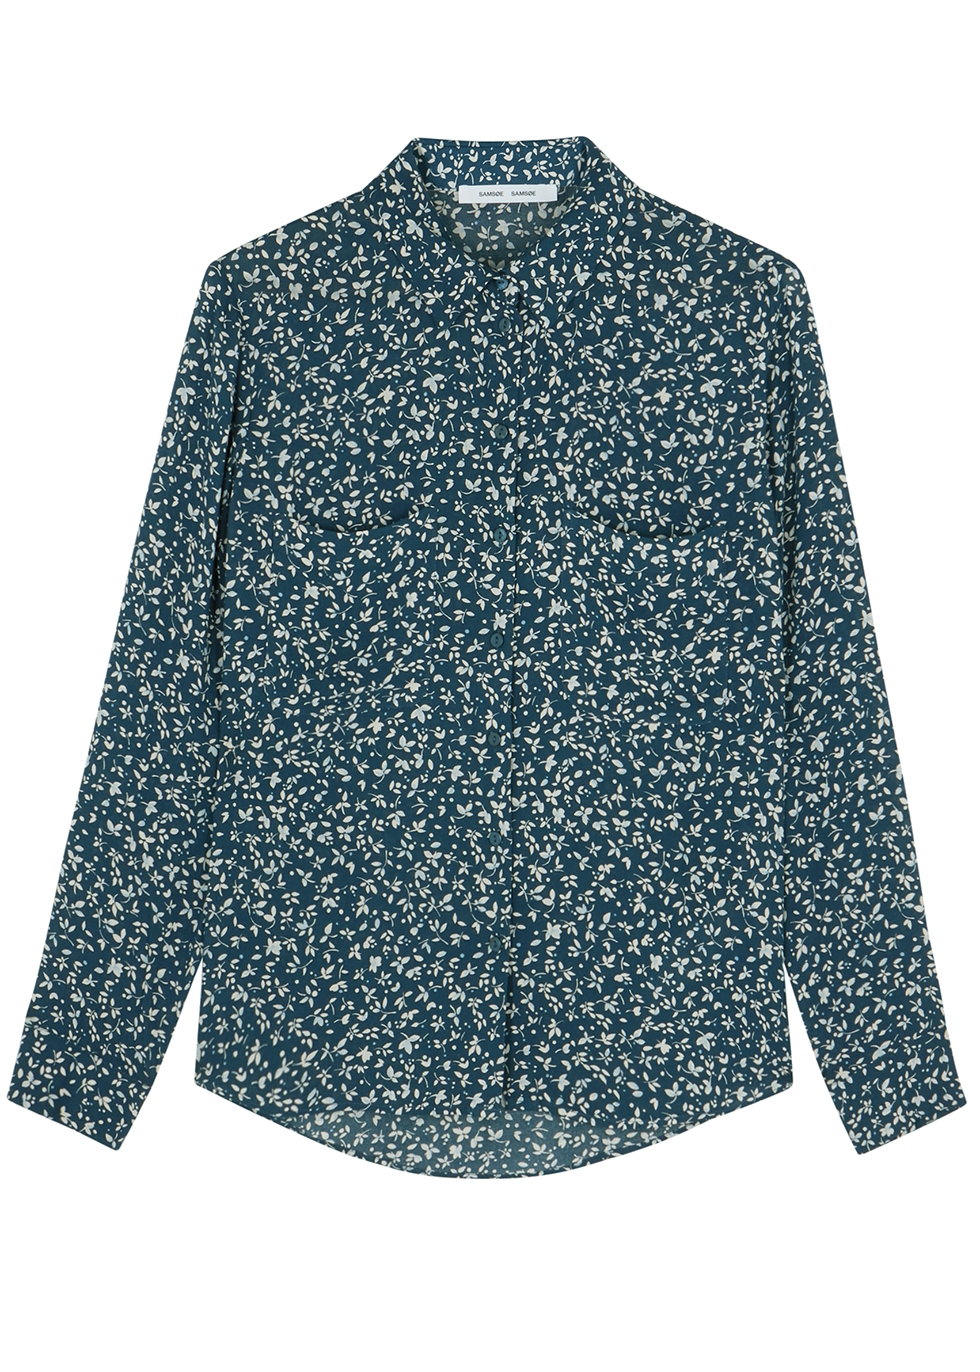 Milly navy floral-print shirt